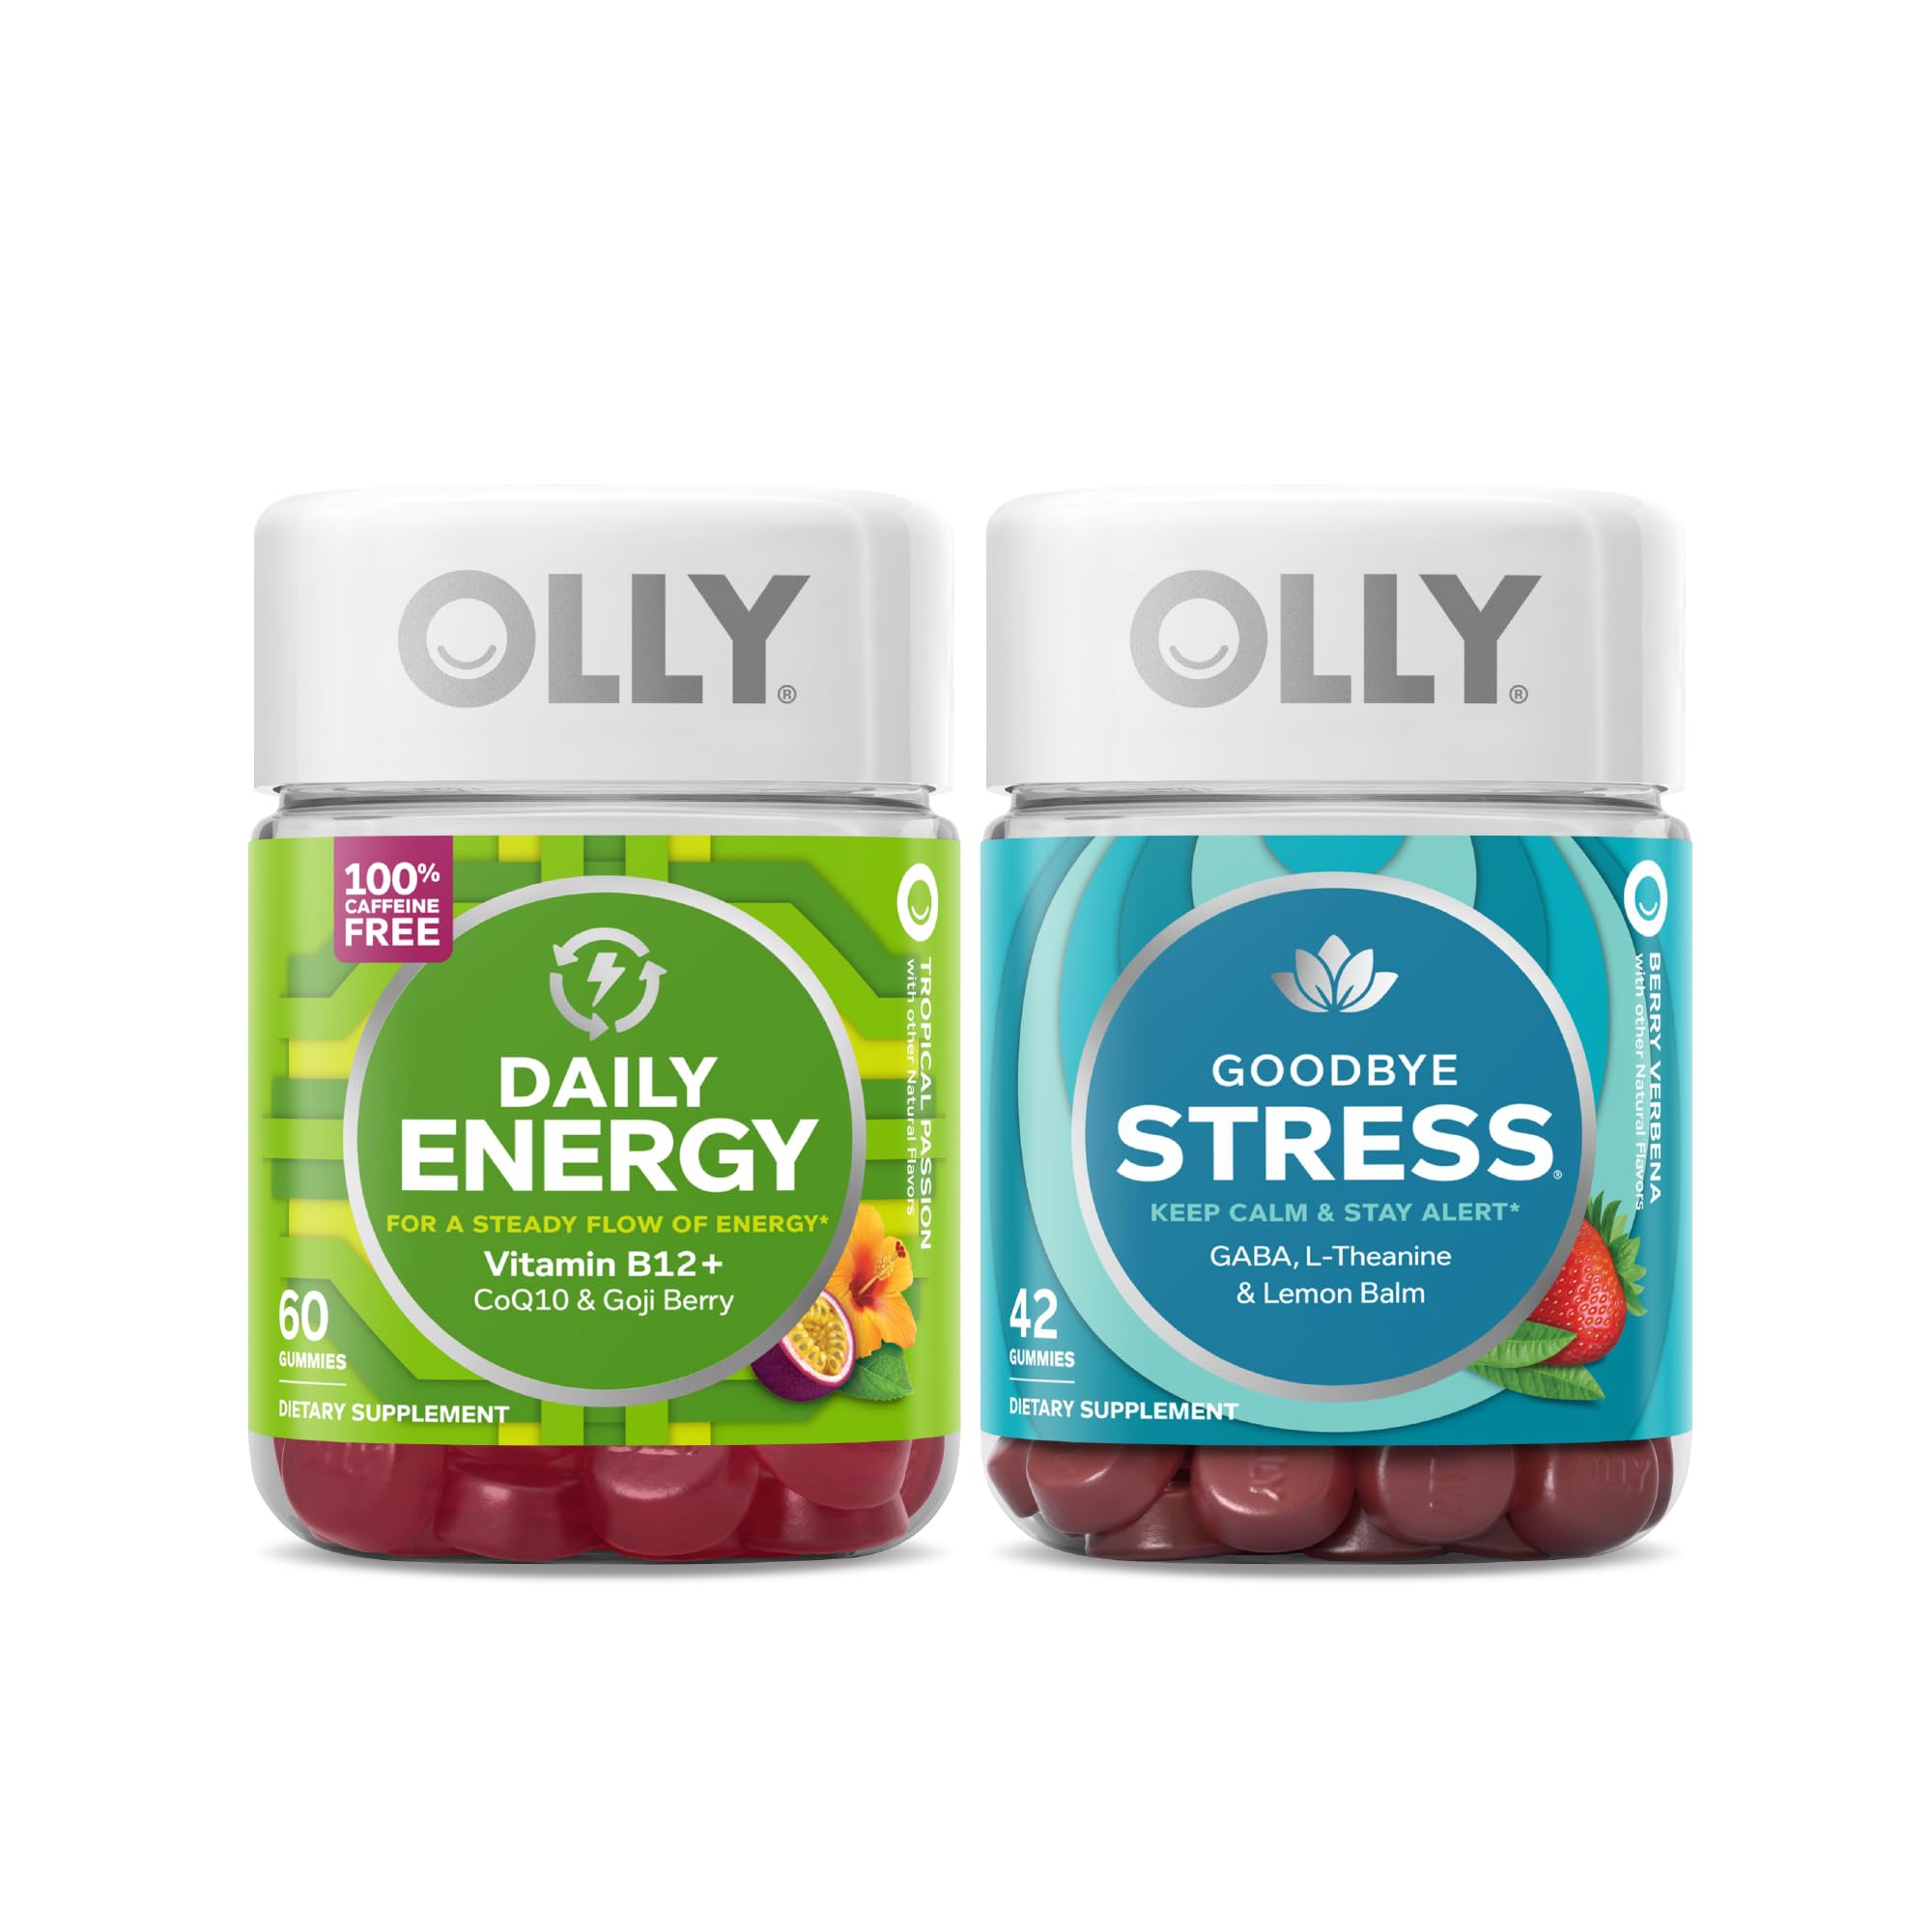 OLLY Daily Energy and Goodbye Stress Starter Pack Bundle, for A Steady Flow of Energy, Keep Calm & Stay Alert, 60 and 42 Count